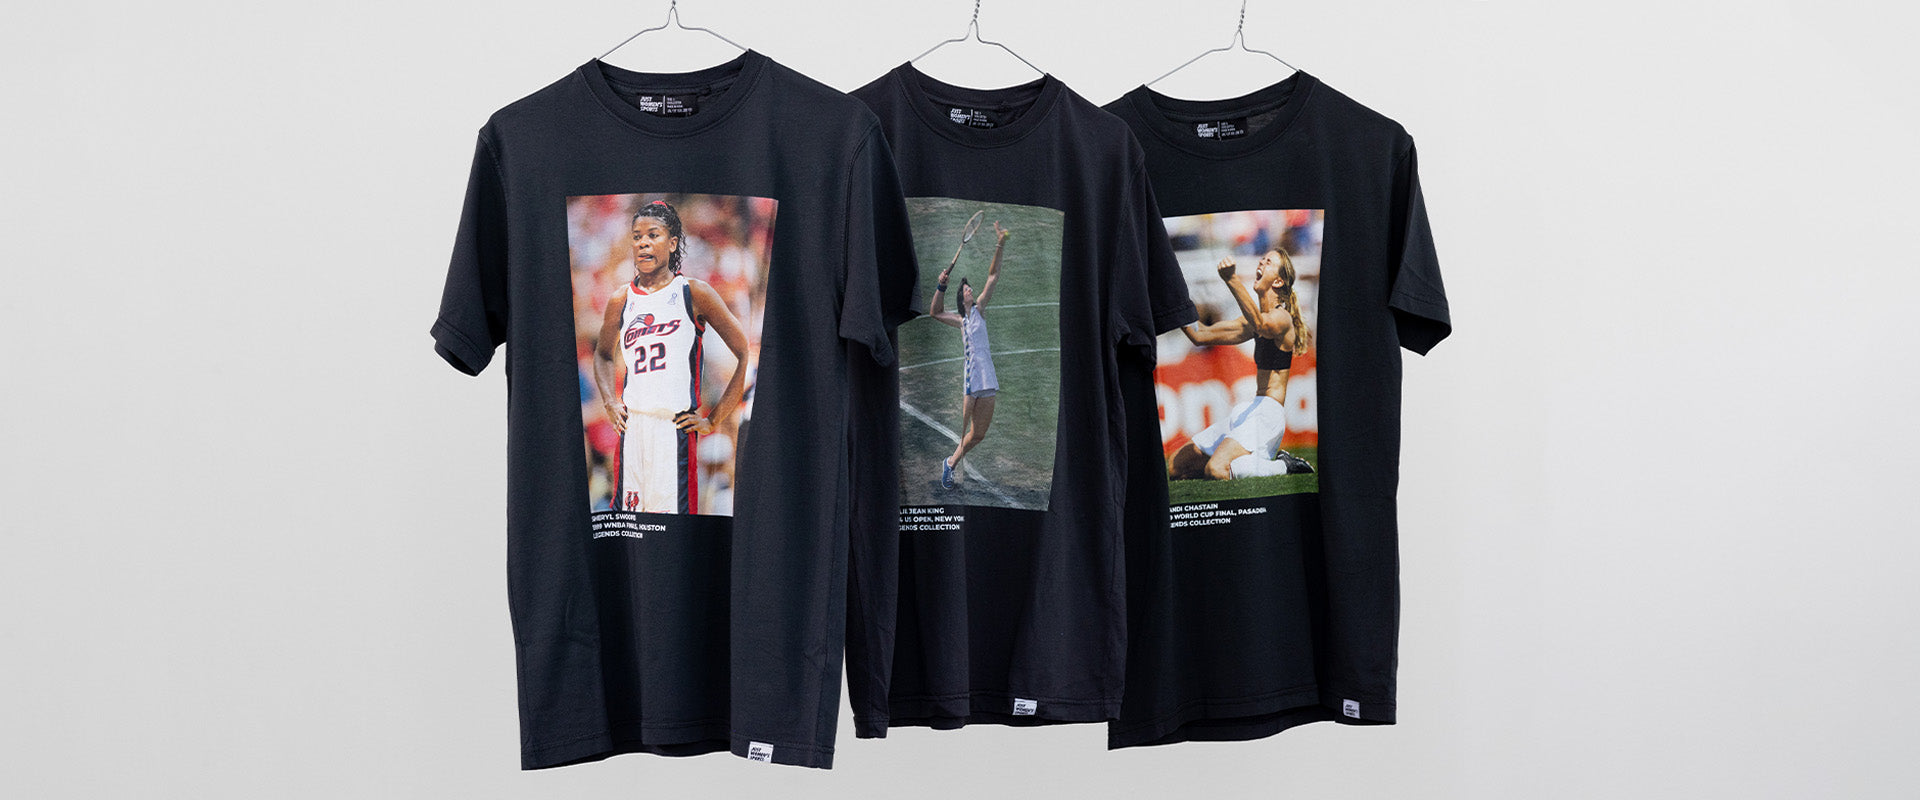 Legends Collection – Just Women's Sports